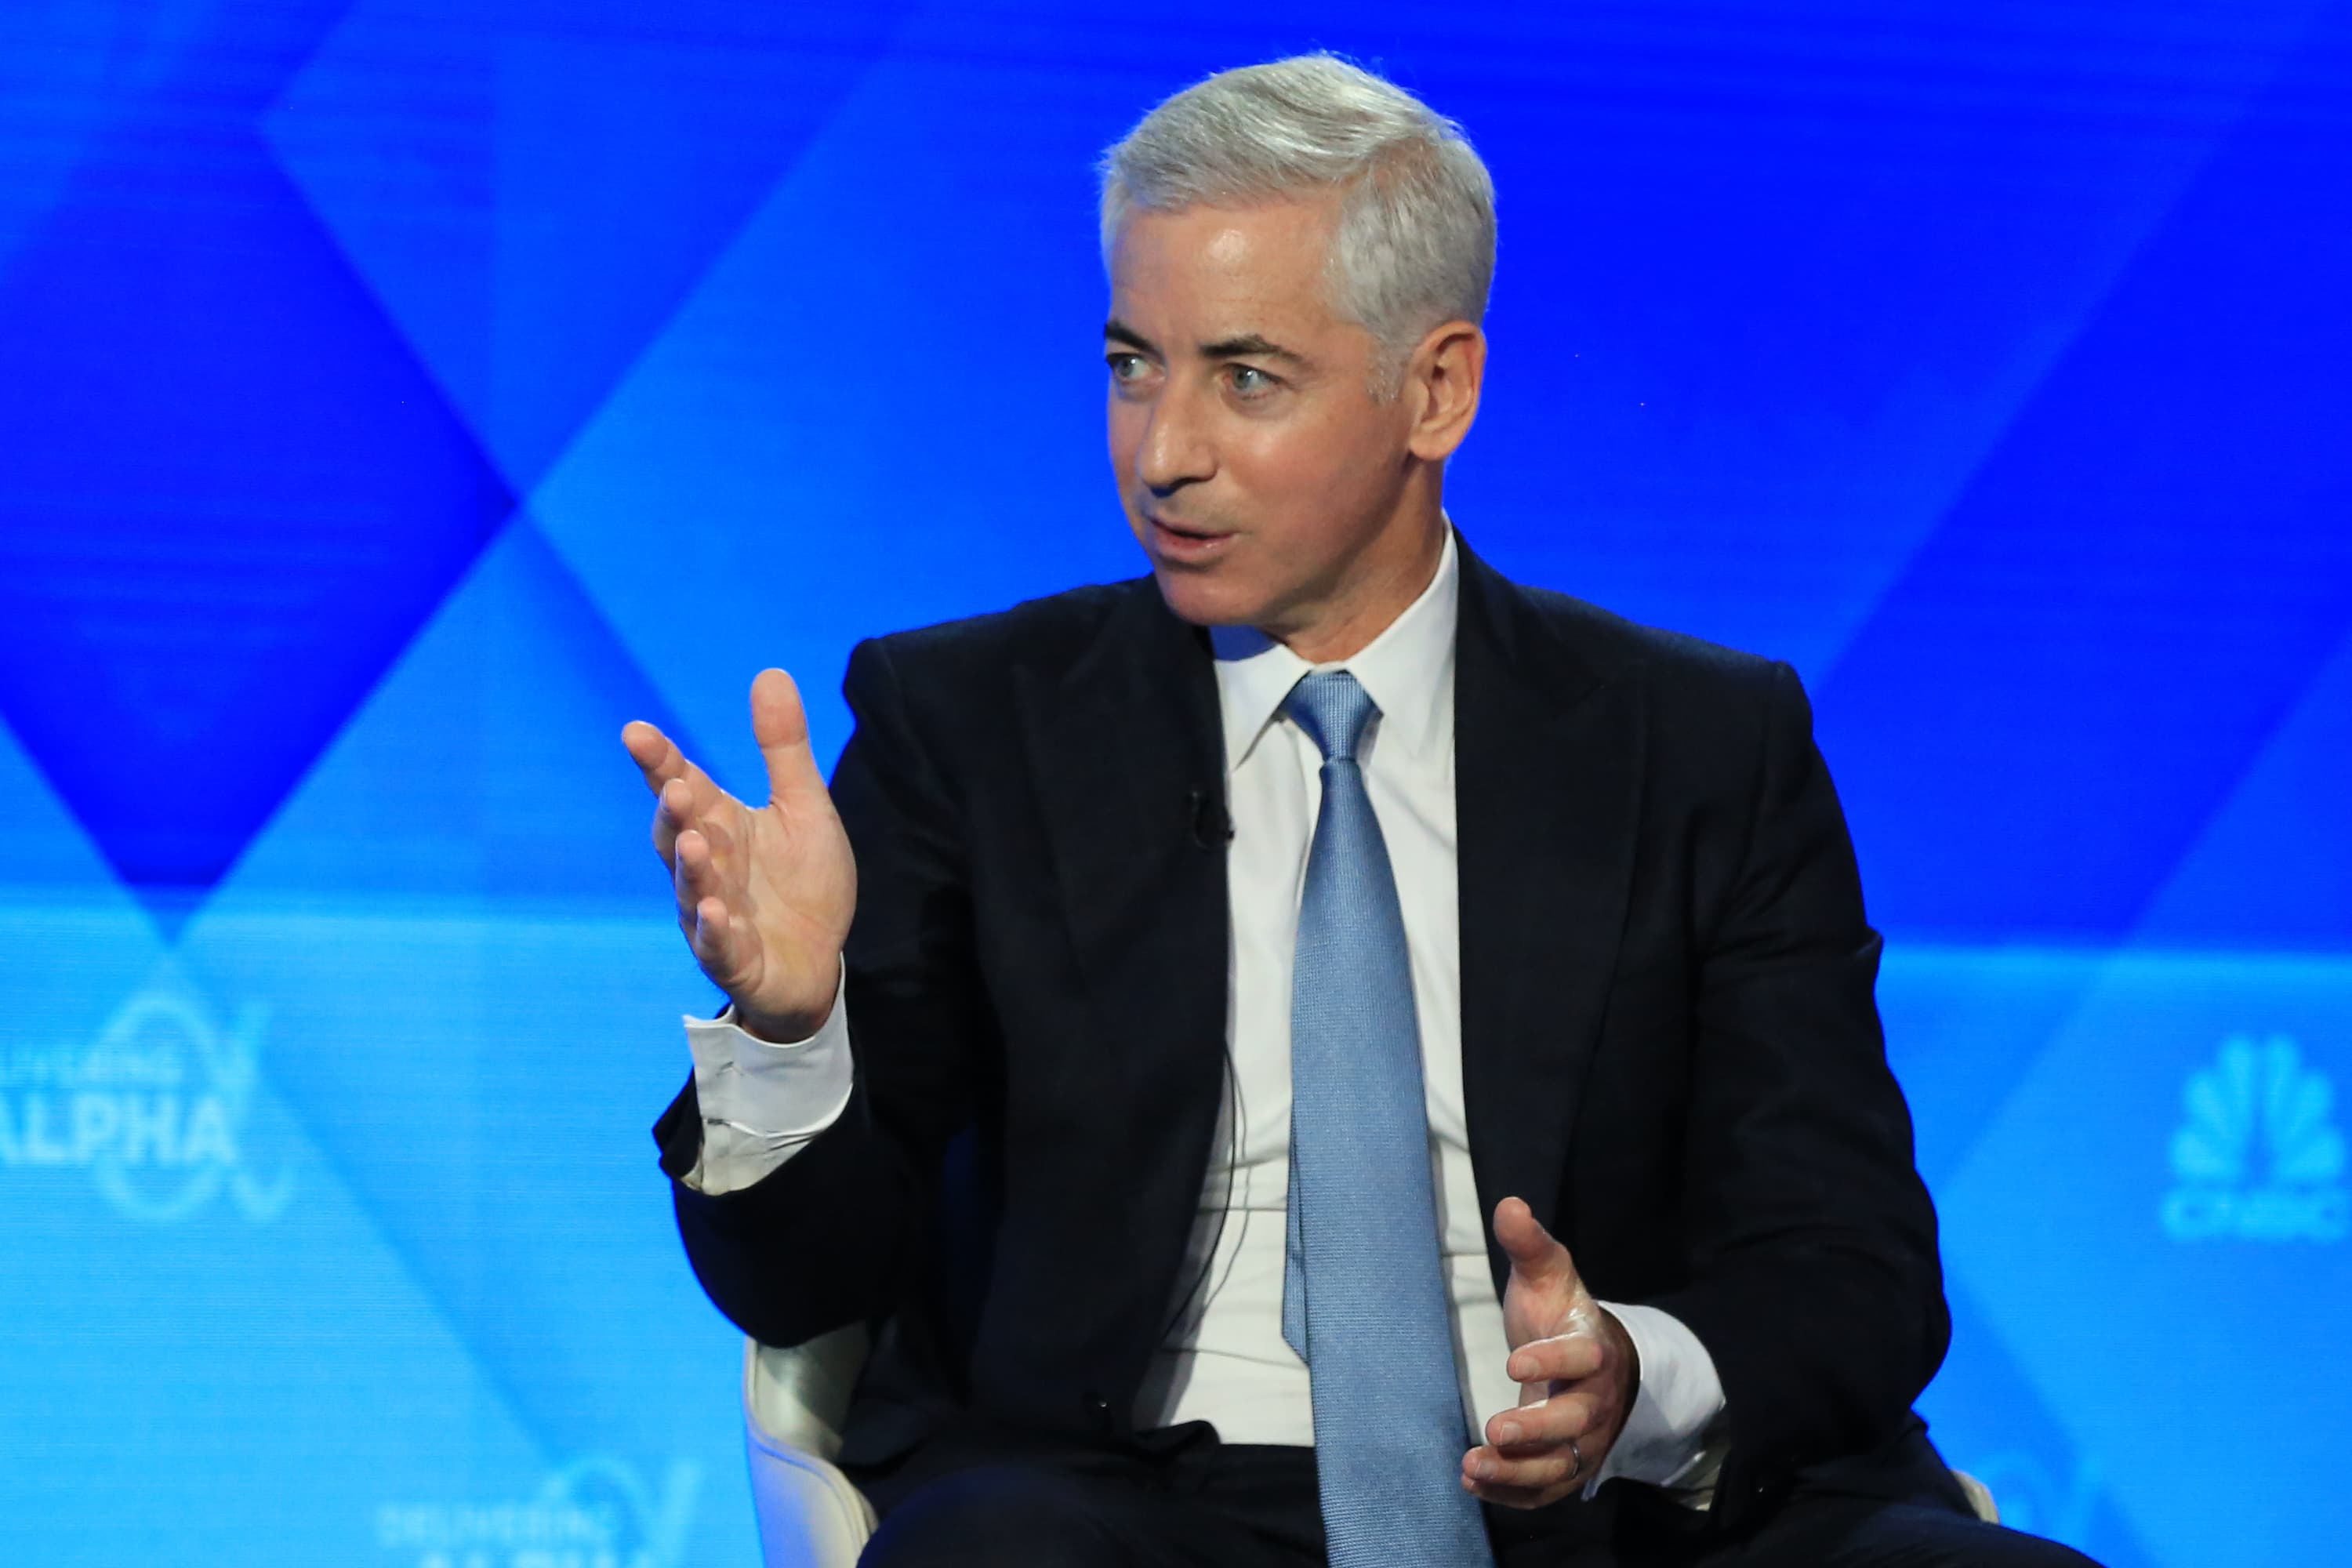 Billionaire Bill Ackman intends to open a fund listed on the New York Stock Exchange for ordinary investors